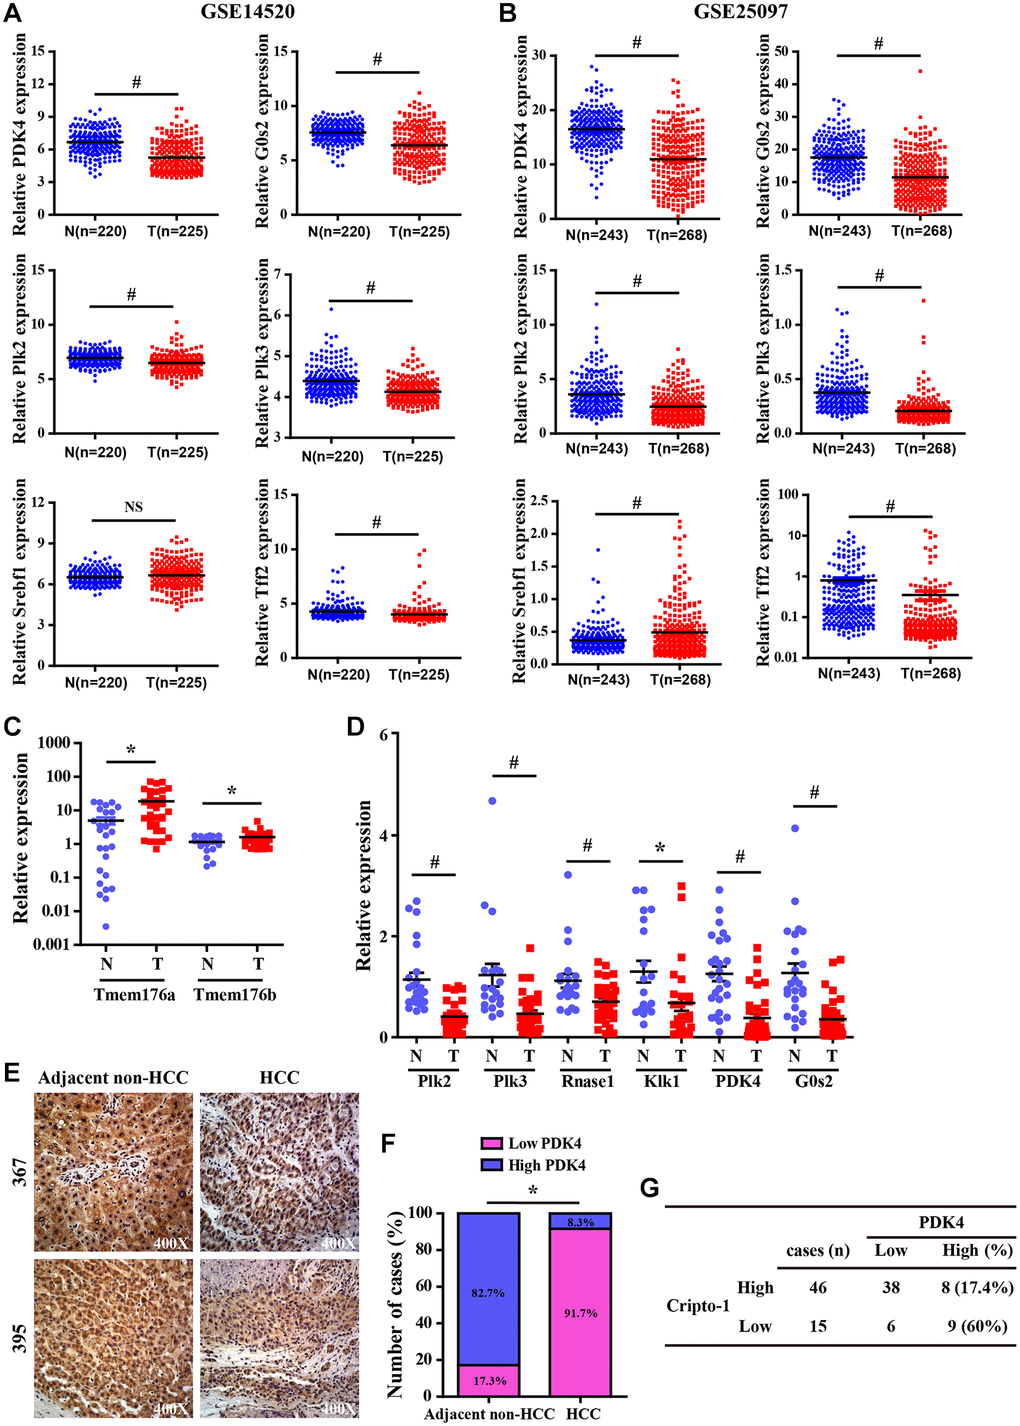 Validation analysis of differentially expressed genes from the liver of RCLG/Alb-Cre mice in HCC tissues. (A–B) The expression levels of CR-1 in HCC (T) and adjacent non-cancerous (N) liver tissue biopsies derived from NCBI-GEO datasets (GSE14520 and GSE25097). (C–D) qRT-PCR analysis shows expression of the indicated genes (selected from Figure 6A–6D) in primary HCC (T) and matched non-tumor liver (N) tissues. (E) Representative IHC images show PDK4 expression in HCC and adjacent non-tumor liver tissue biopsies. (F) IHC assay results show the percentage of HCC and adjacent non-tumor liver tissue biopsies with high or low PDK4 expression. As shown, PDK4 expression was significantly lower in the HCC tissue biopsies than in the adjacent non-tumor liver tissues. (G) The correlation analysis between CR-1 and PDK4 expression in HCC specimens based on PDK4 IHC data.